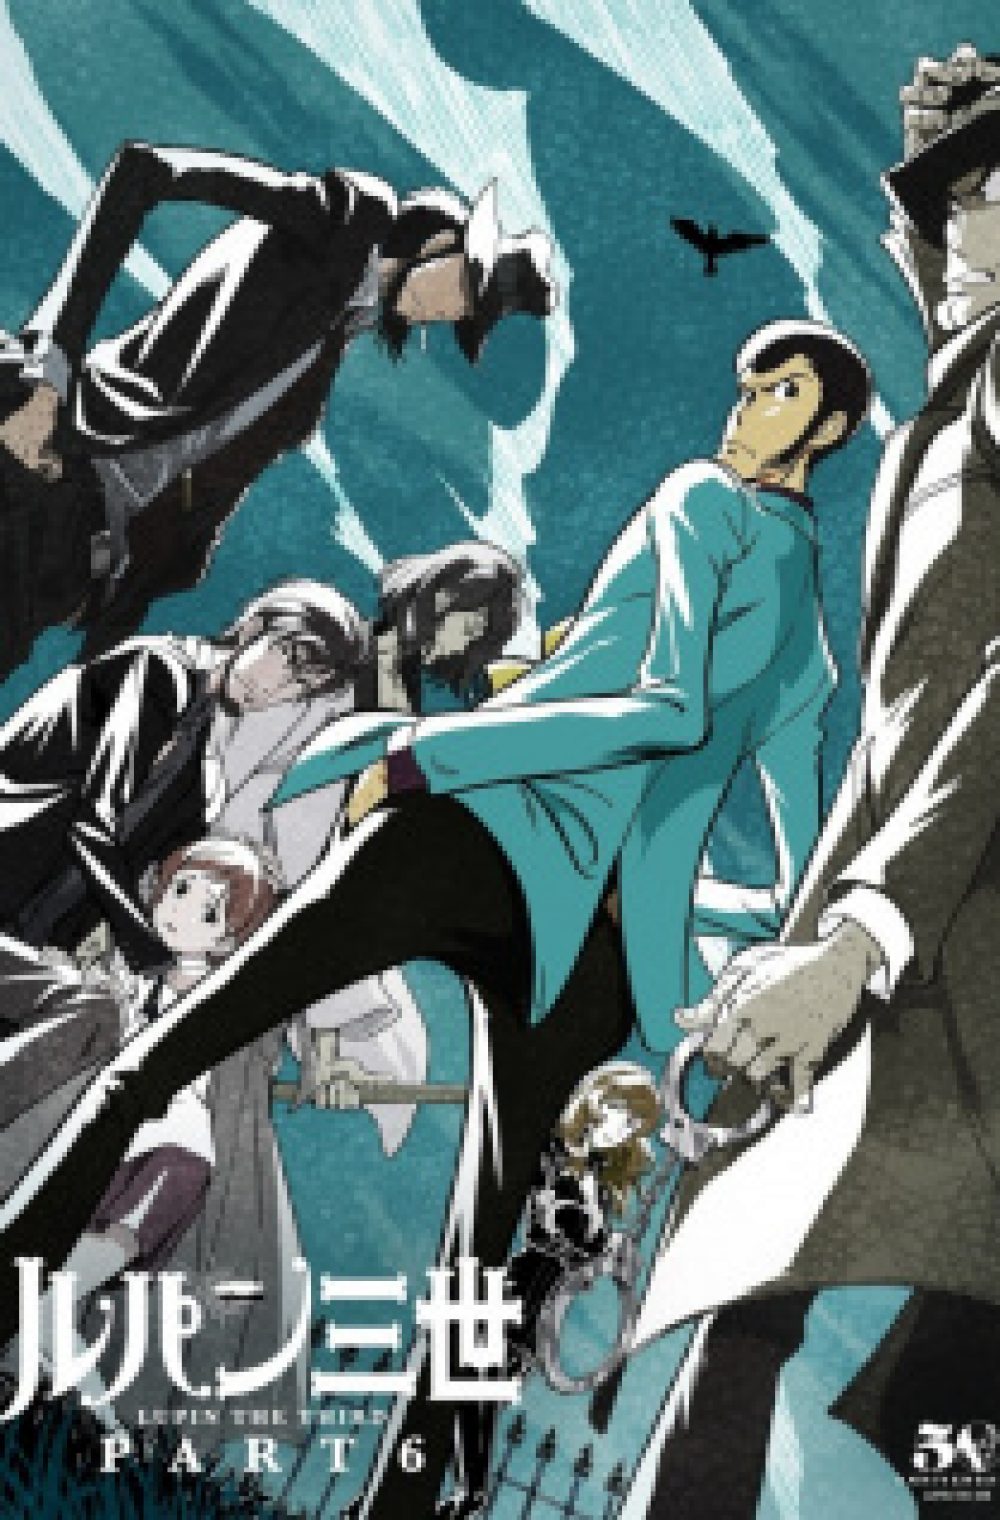 Lupin III – Part 6 ( LUPIN THE 3rd PART 6 )